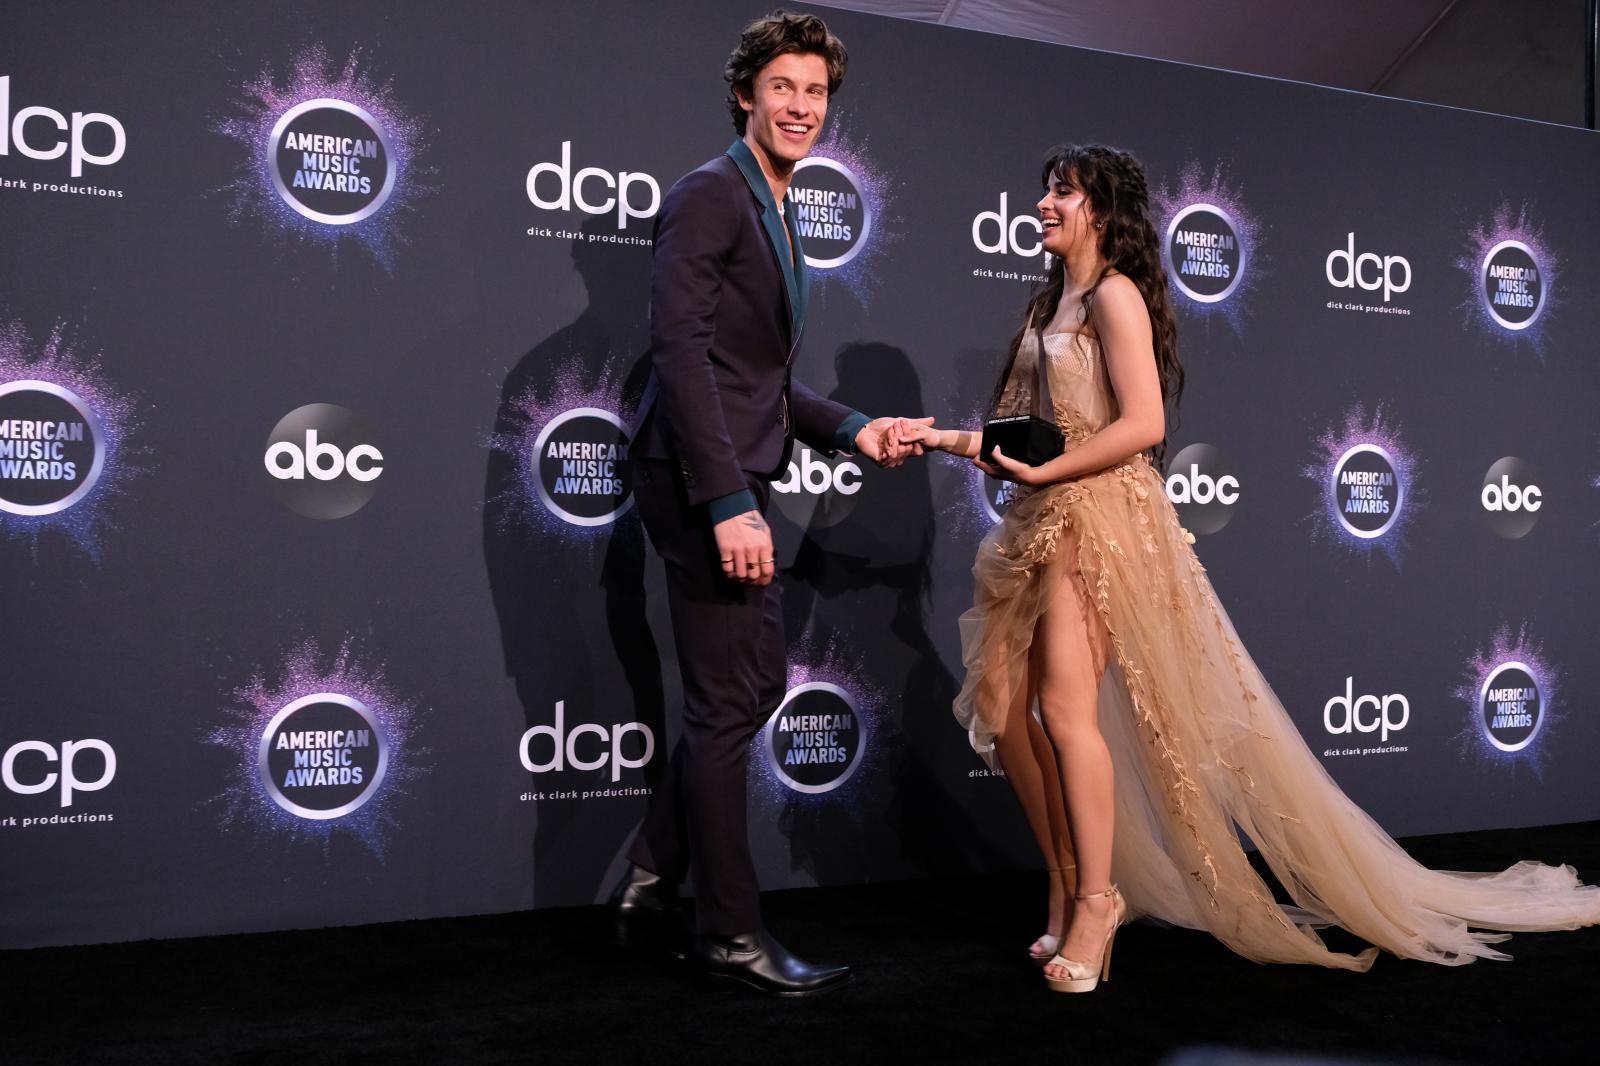 Image from RED CARPET I CELEBRITY - LOS ANGELES, CALIFORNIA - NOVEMBER 24: Shawn Mendes and...